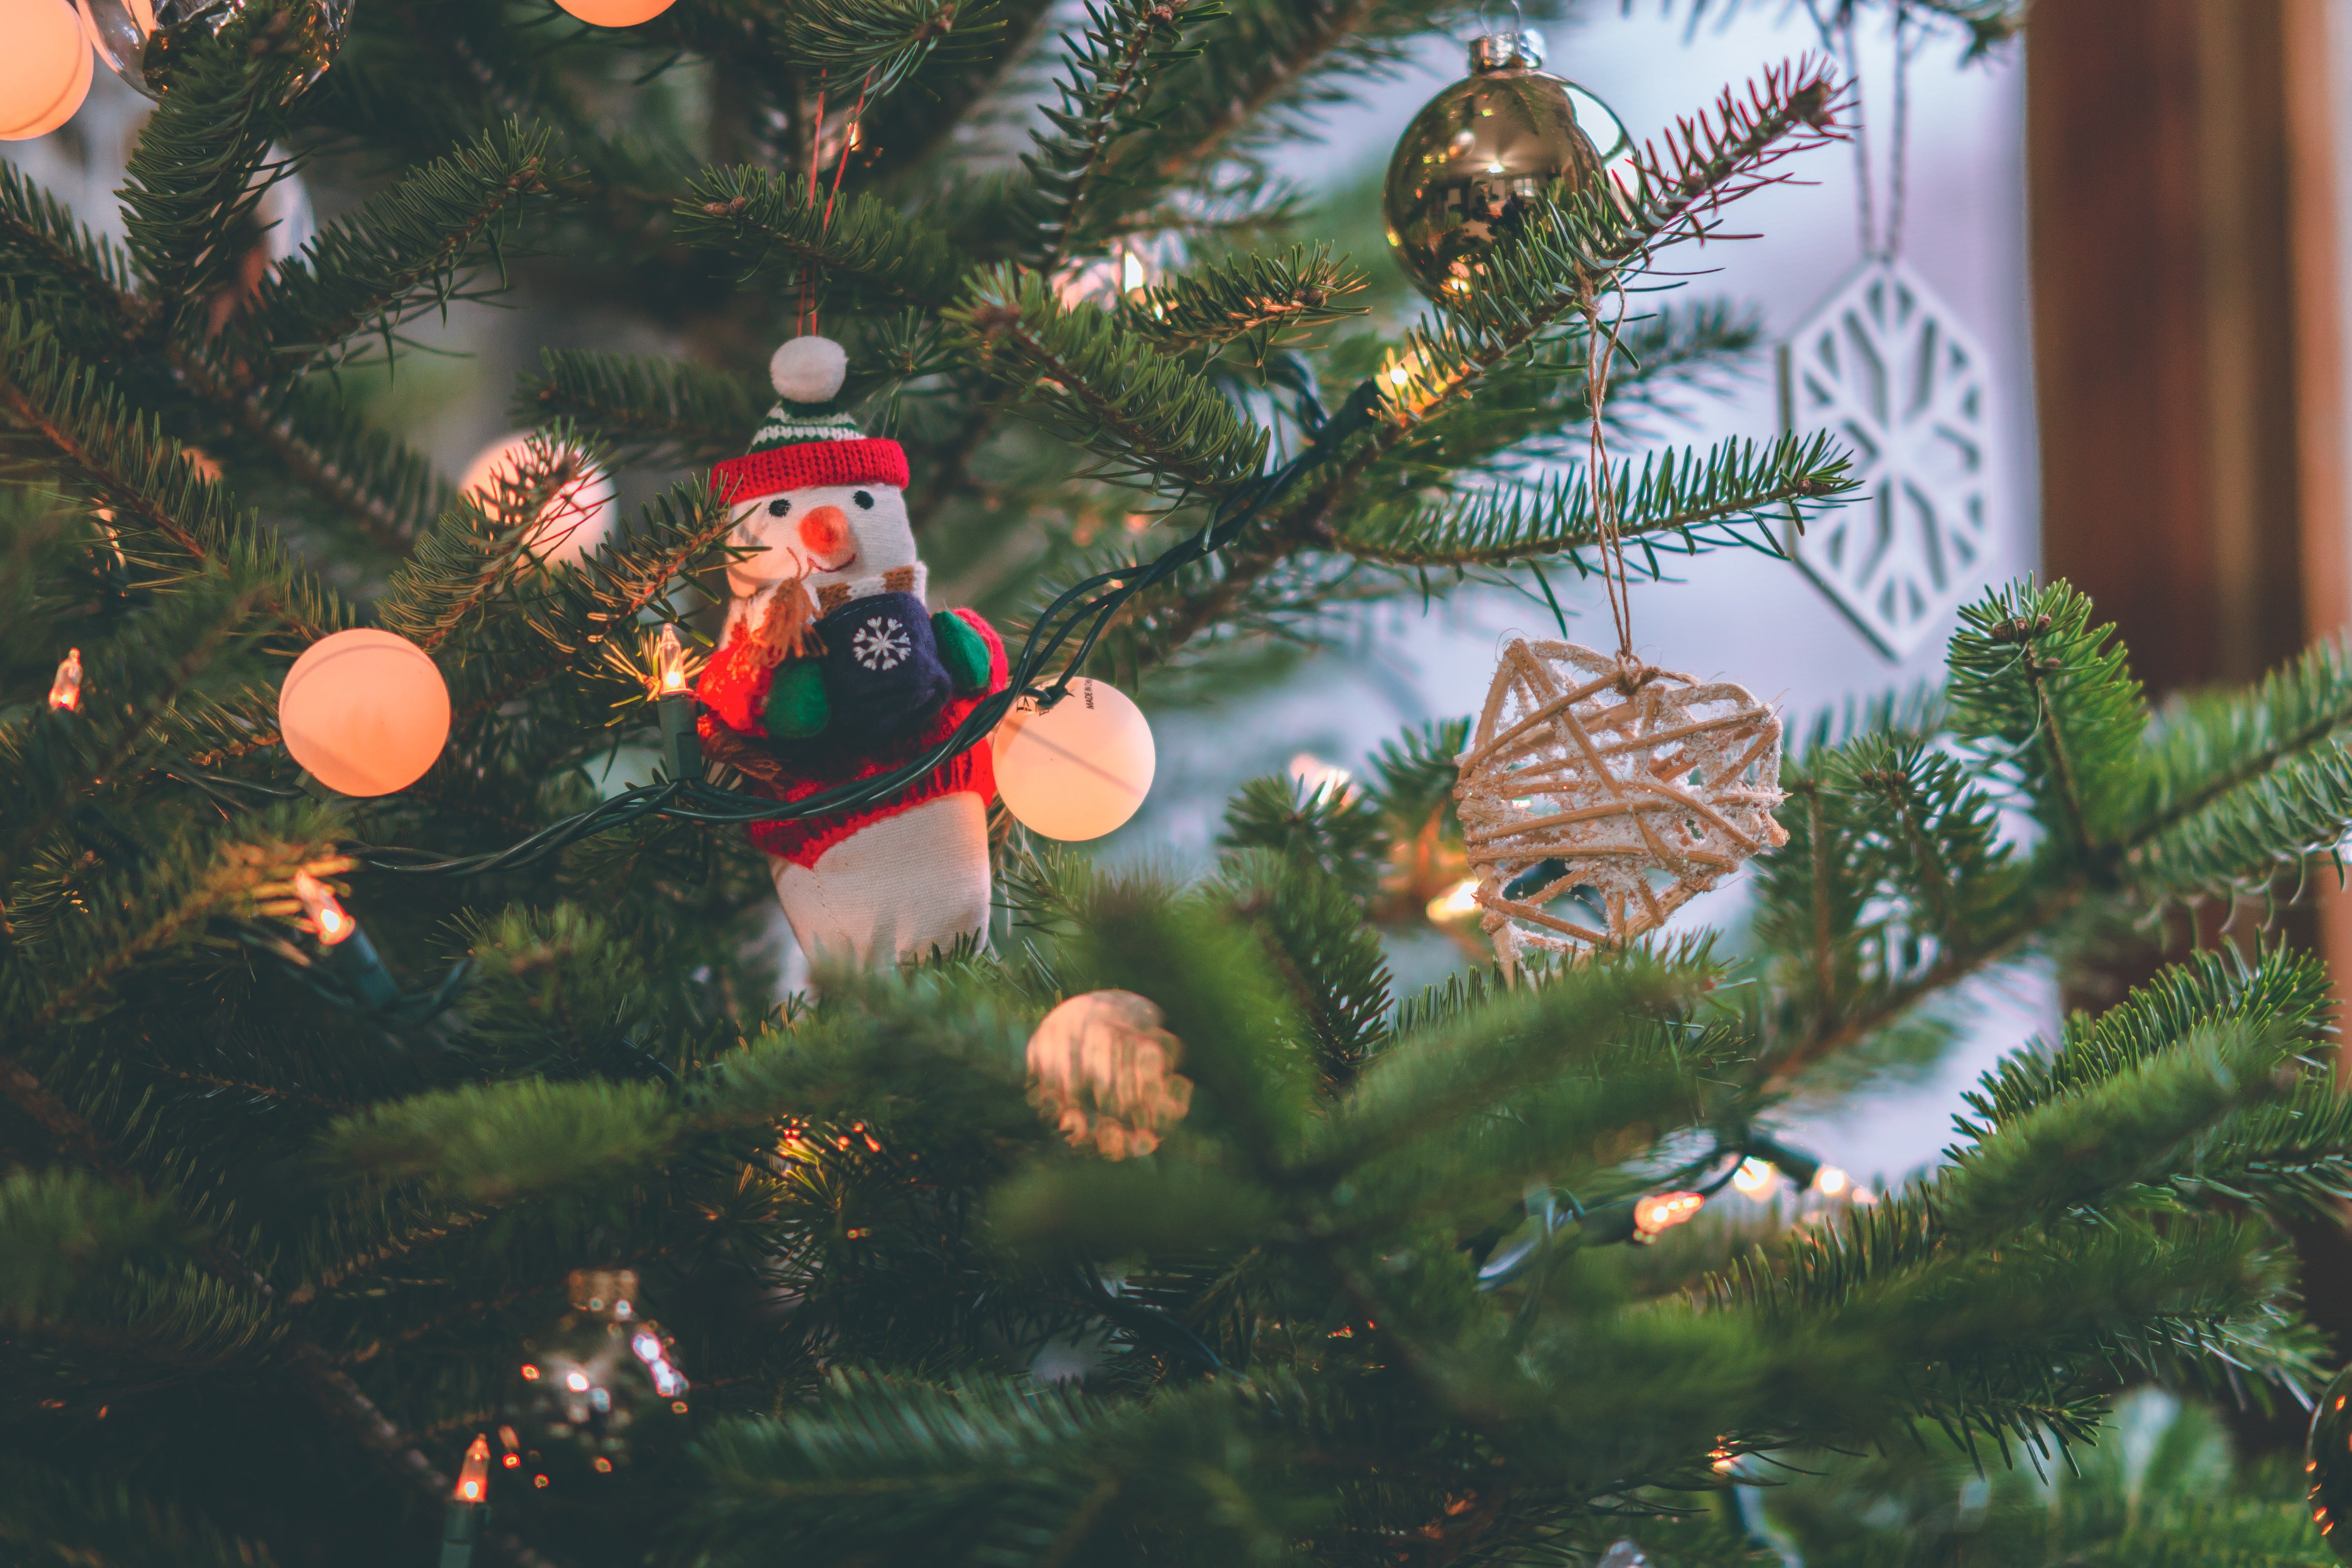 Image of a decorated Christmas tree | Photo: Pexels